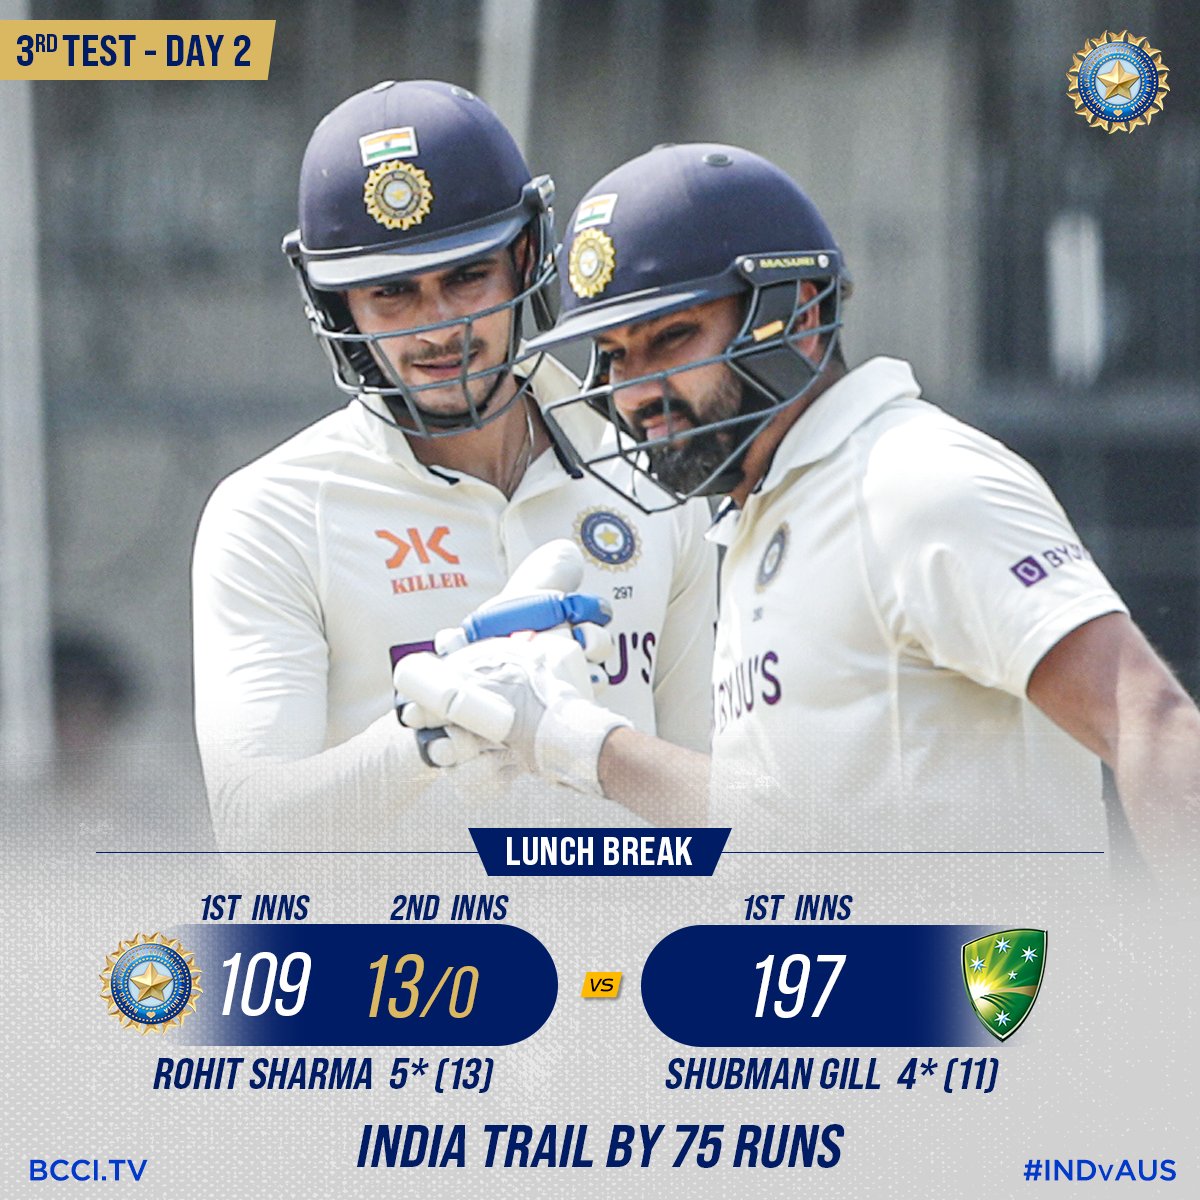 BCCI on Twitter: "An absorbing first session on Day 2 of the 3rd Test. India 13/0 &amp; 109, trail Australia (197) by 75 runs at Lunch. Scorecard https://t.co/t0IGbs2qyj #INDvAUS @mastercardindia